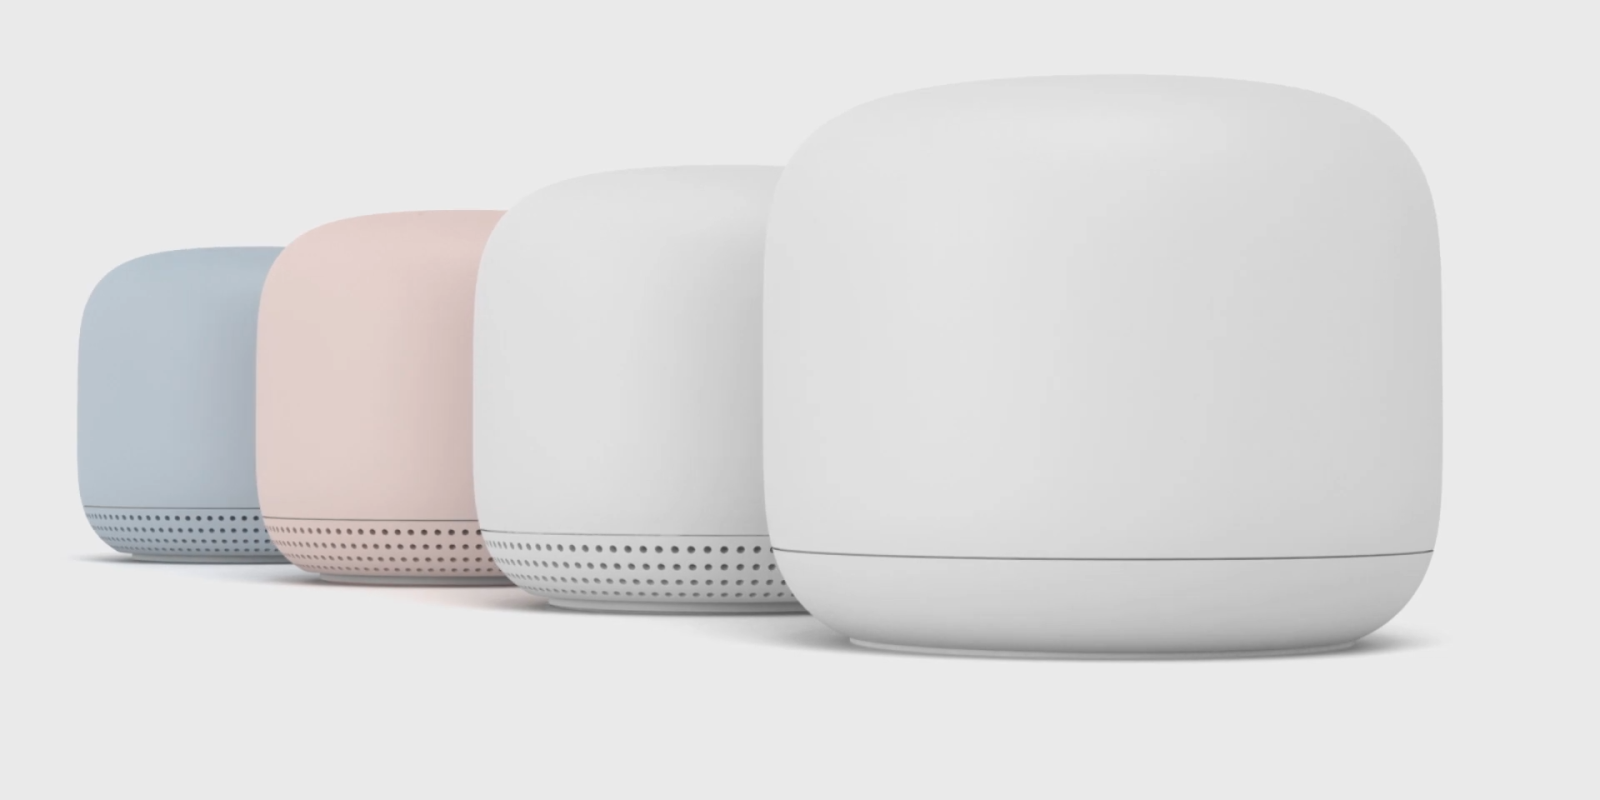 Google Nest WiFi Pro 6E leaks online ahead of official launch; price revealed to be $199.99